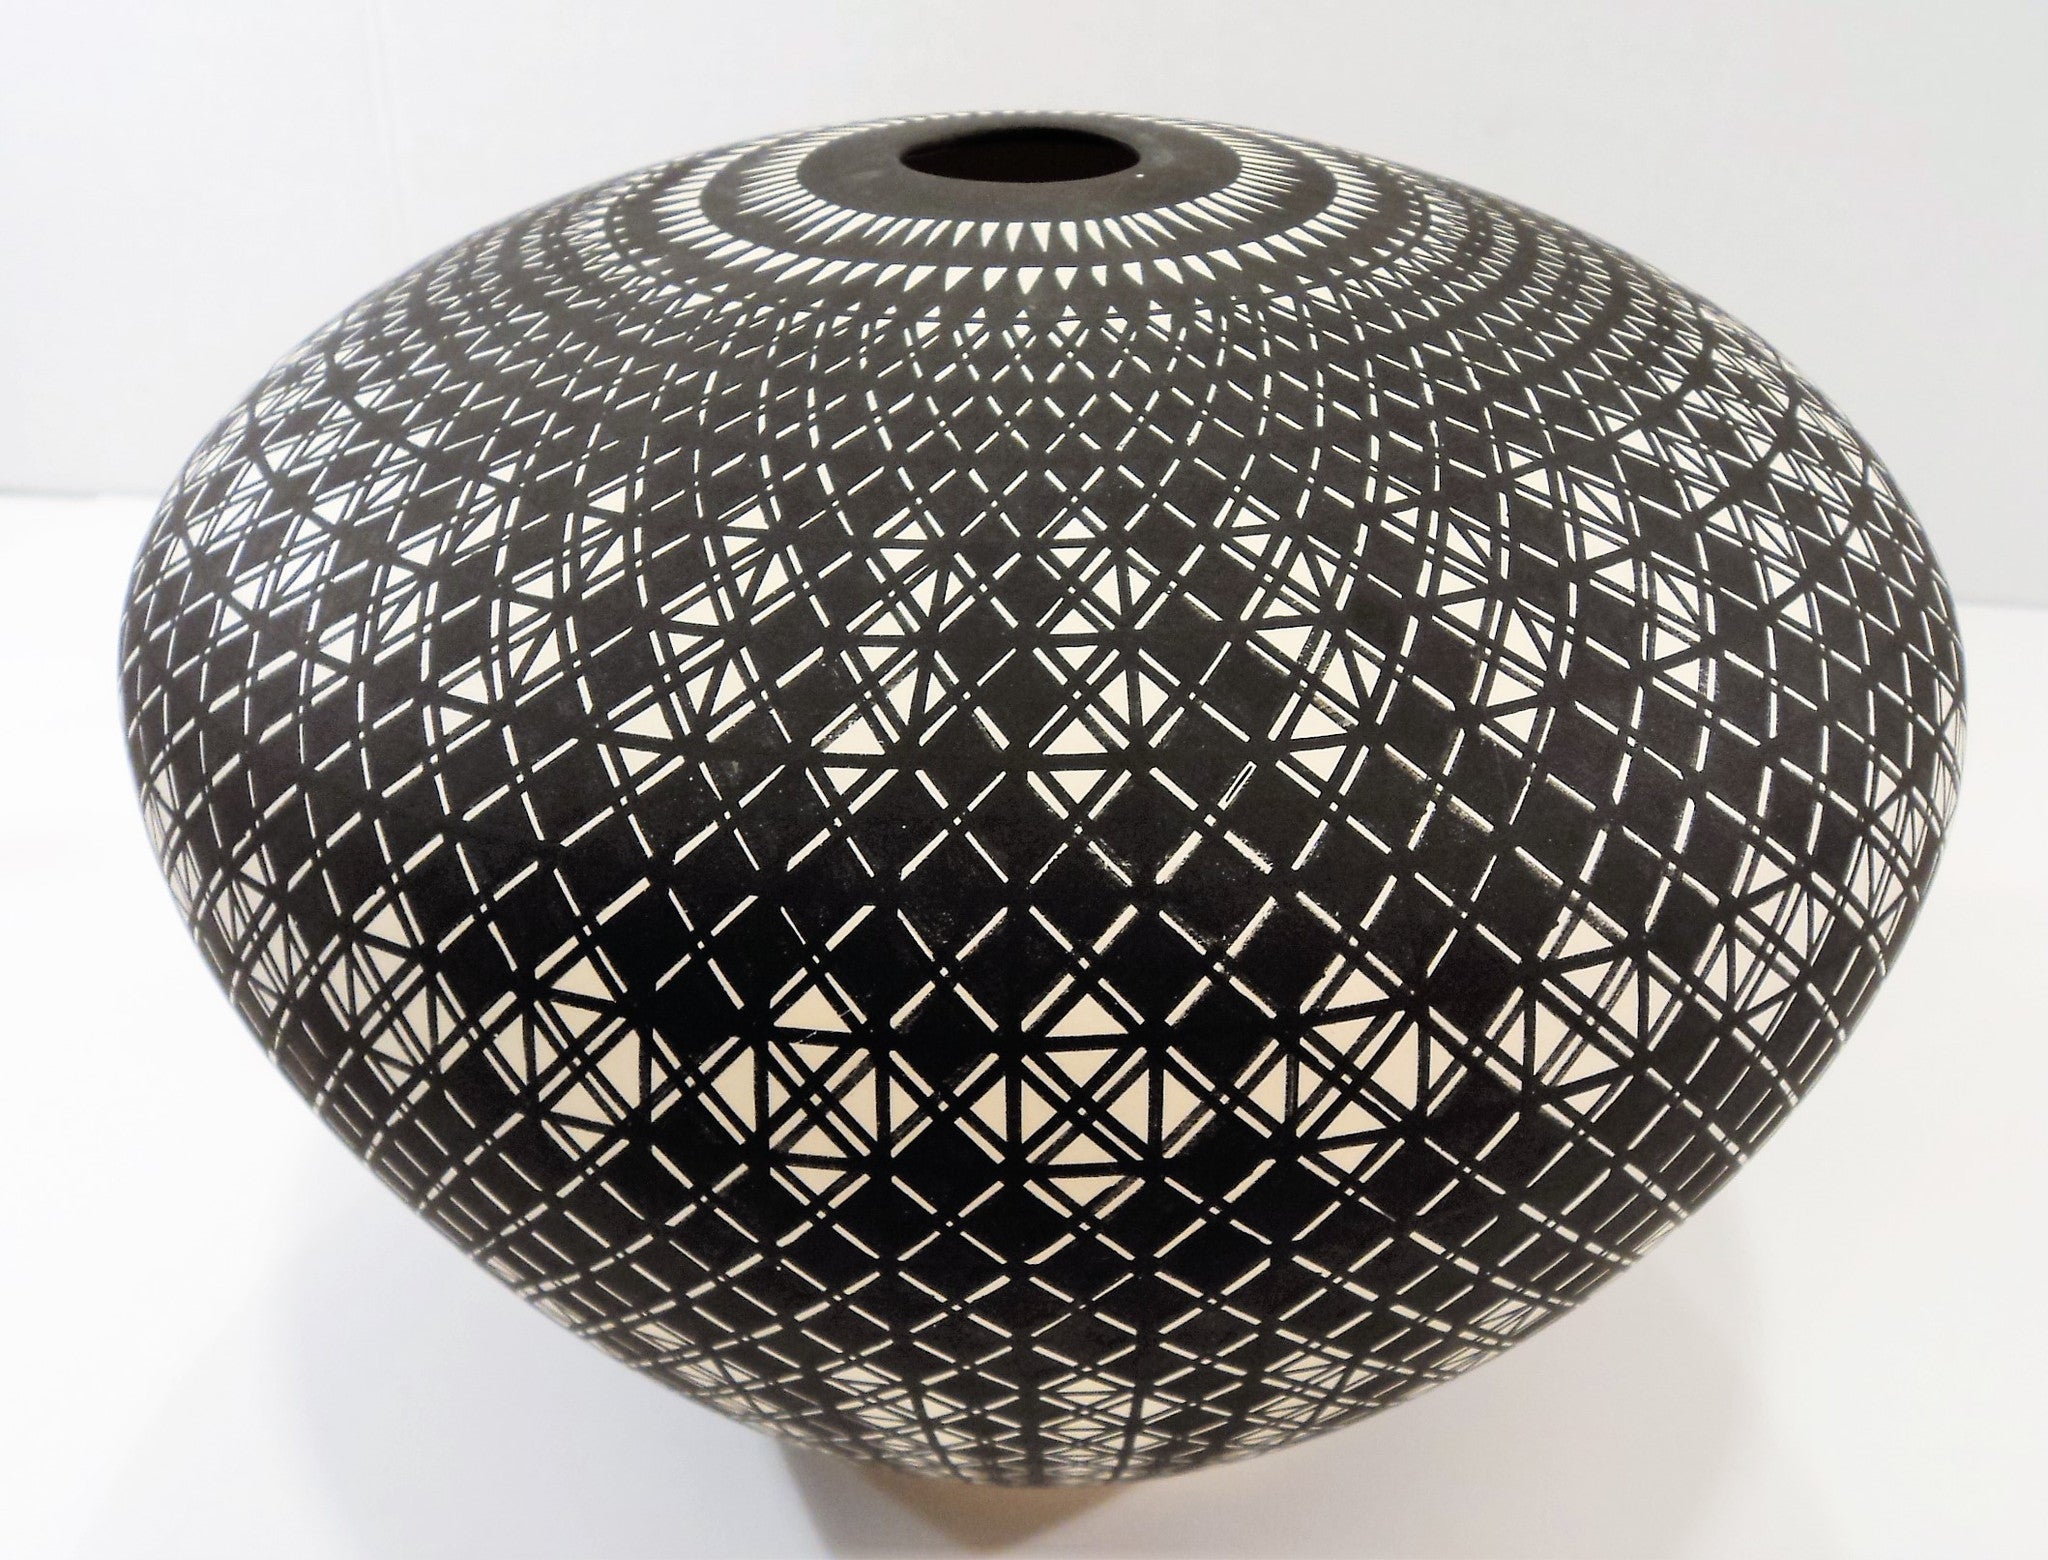 Signed Ceramic Acoma Seed Pot by Greg Victorino